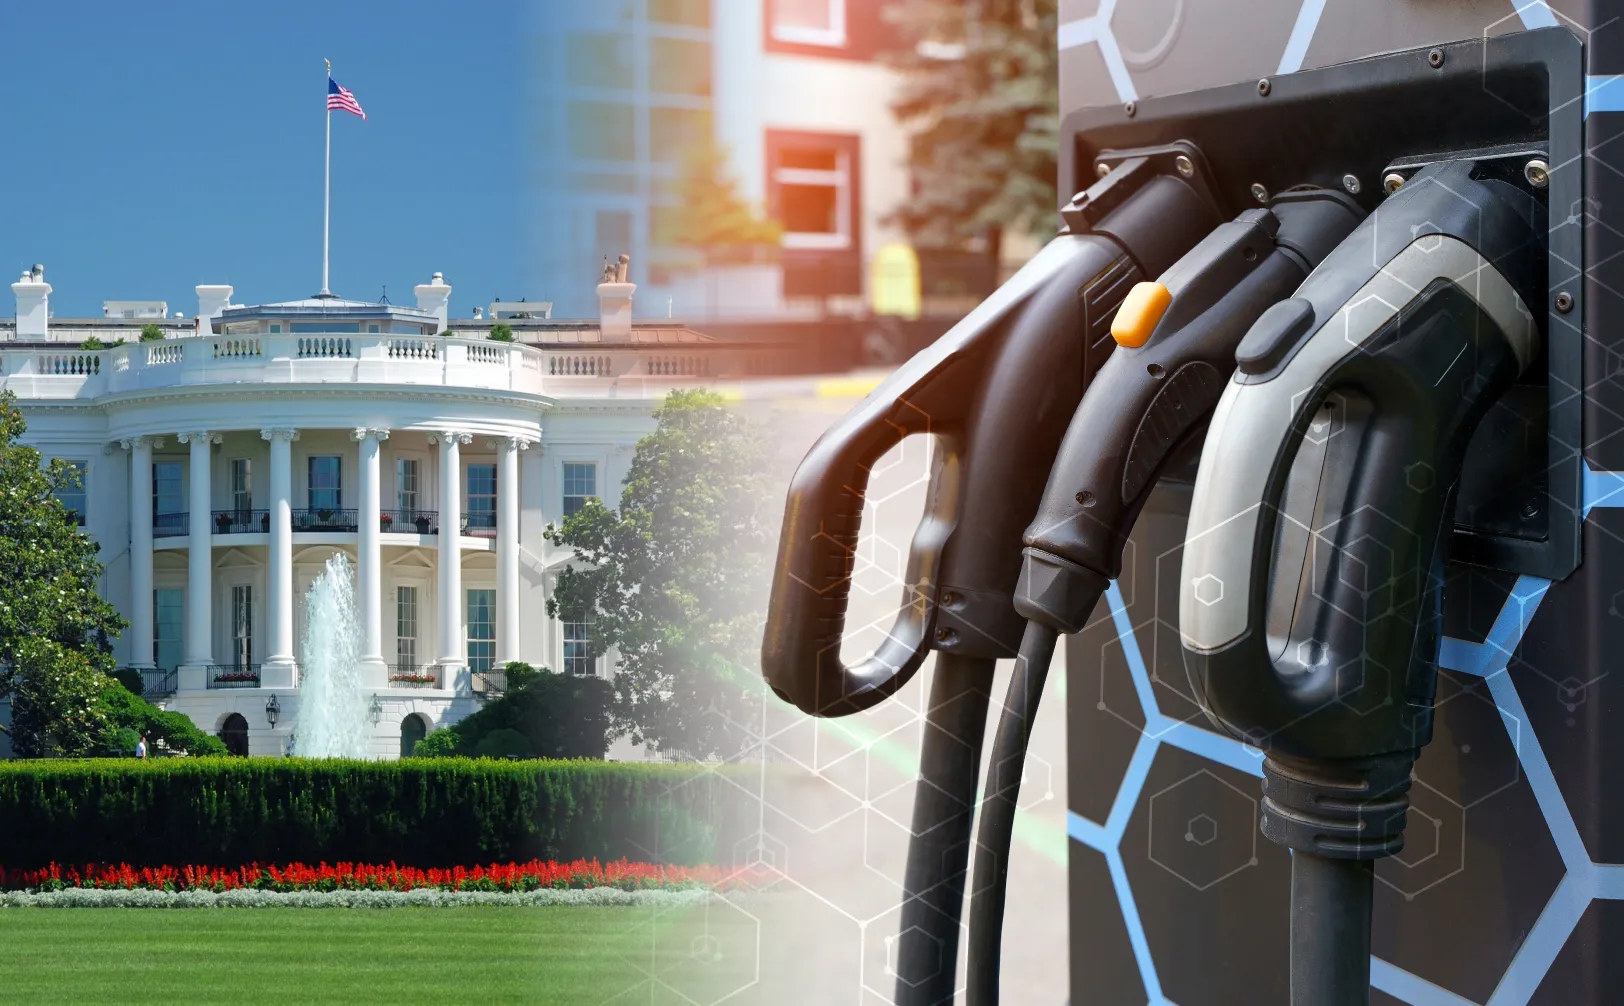 White House approved the first round of funding for EV charging infrastructure